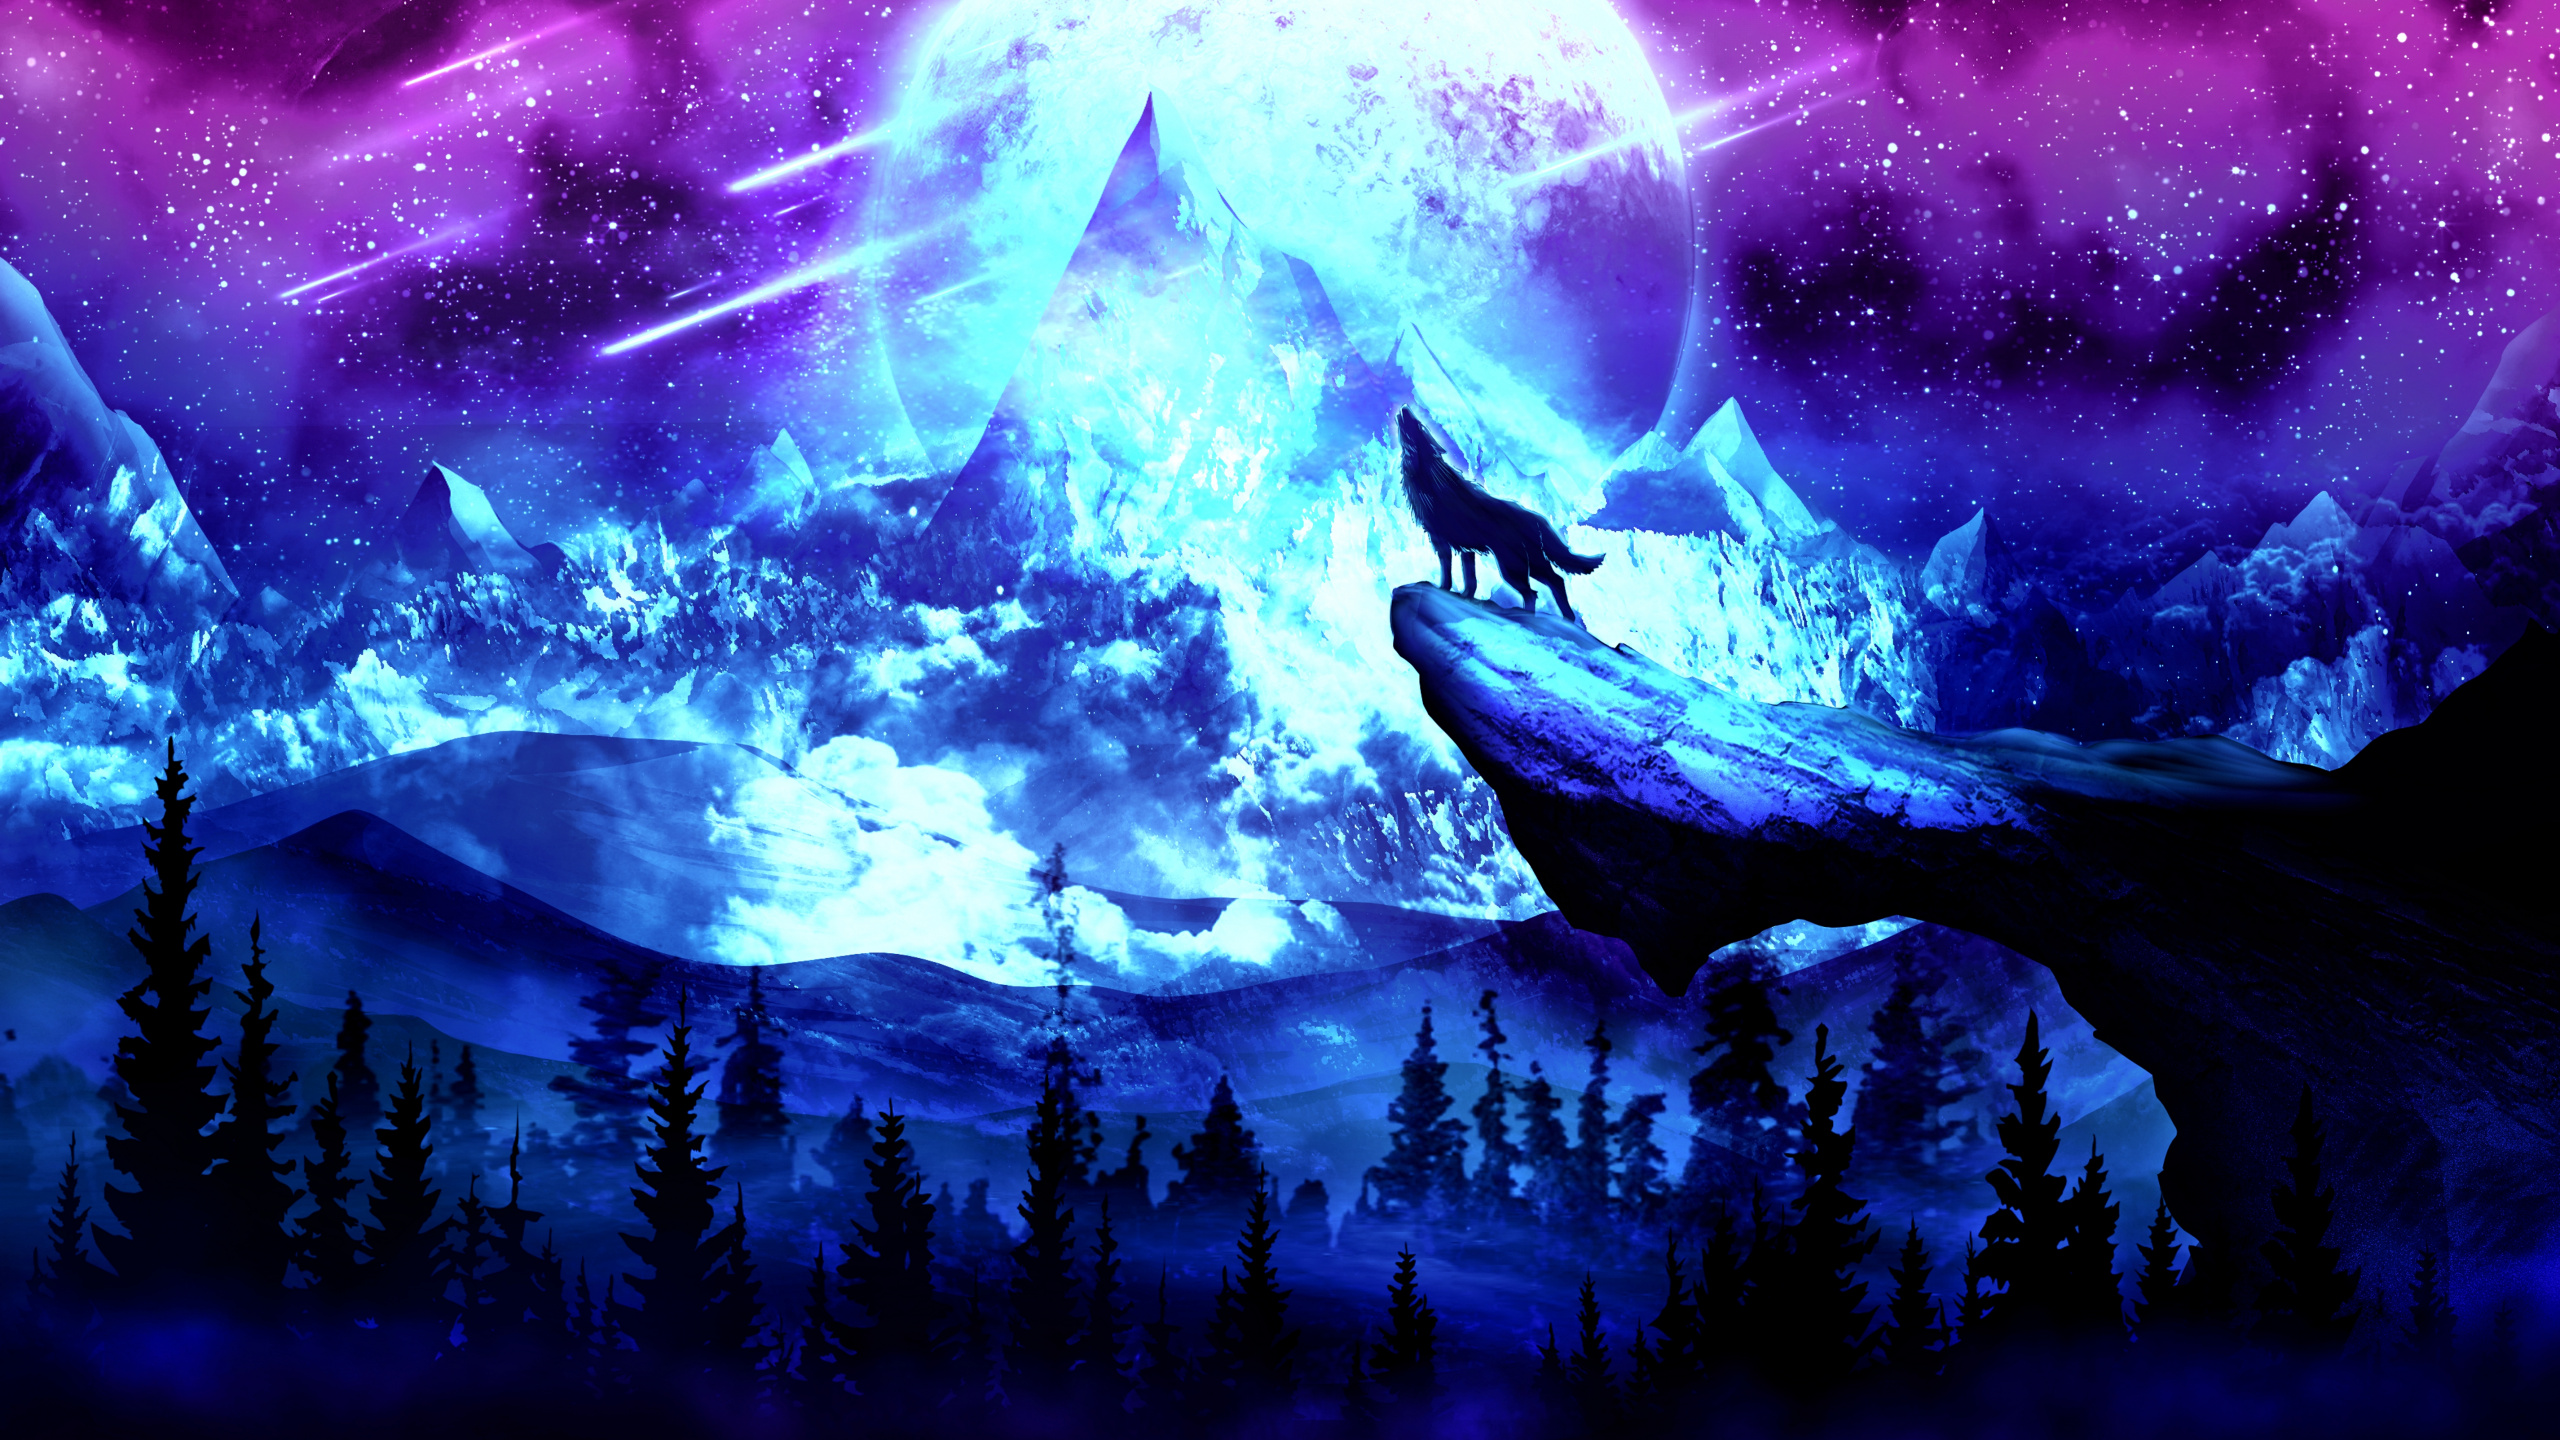 Purple and Blue Sky With Stars. Wallpaper in 2560x1440 Resolution